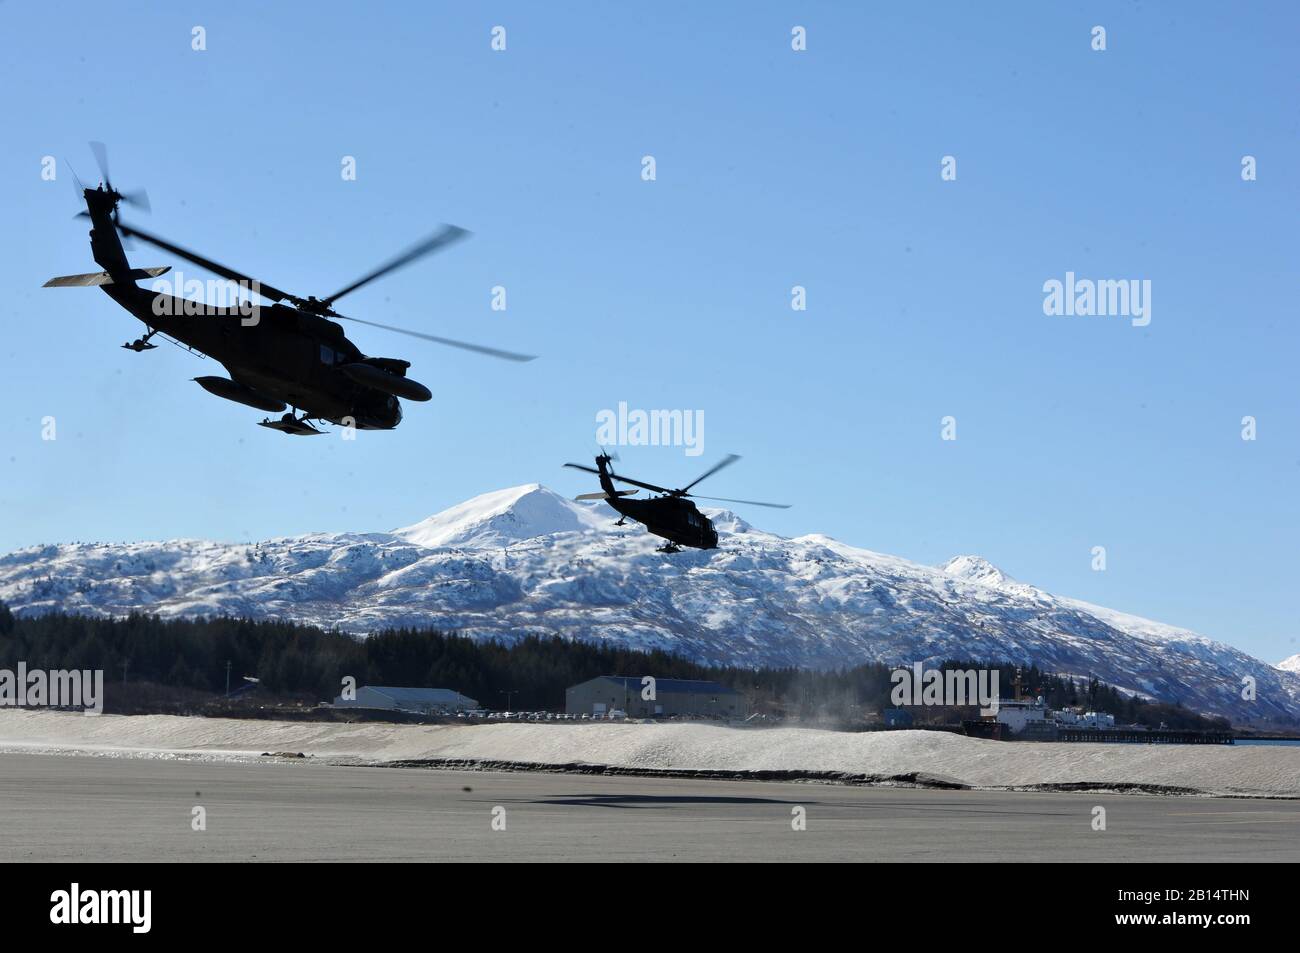 Two U.S. Army UH-60 Black Hawk helicopters assigned to the Alaska National Guard’s 1st Battalion, 207th Aviation Regiment launch toward villages on Kodiak Island as part of the Arctic Care 2017 medical readiness training, March 28, 2017, at Coast Guard Air Station Kodiak, Alaska. Arctic Care 2017 is an Office of Secretary of Defense sponsored, Air Force Reserve Command led, training event coordinated with Kodiak Area Native Association and civil authorities in Kodiak. (U.S. Air Force photo by Master Sgt. Luke Johnson) Stock Photo